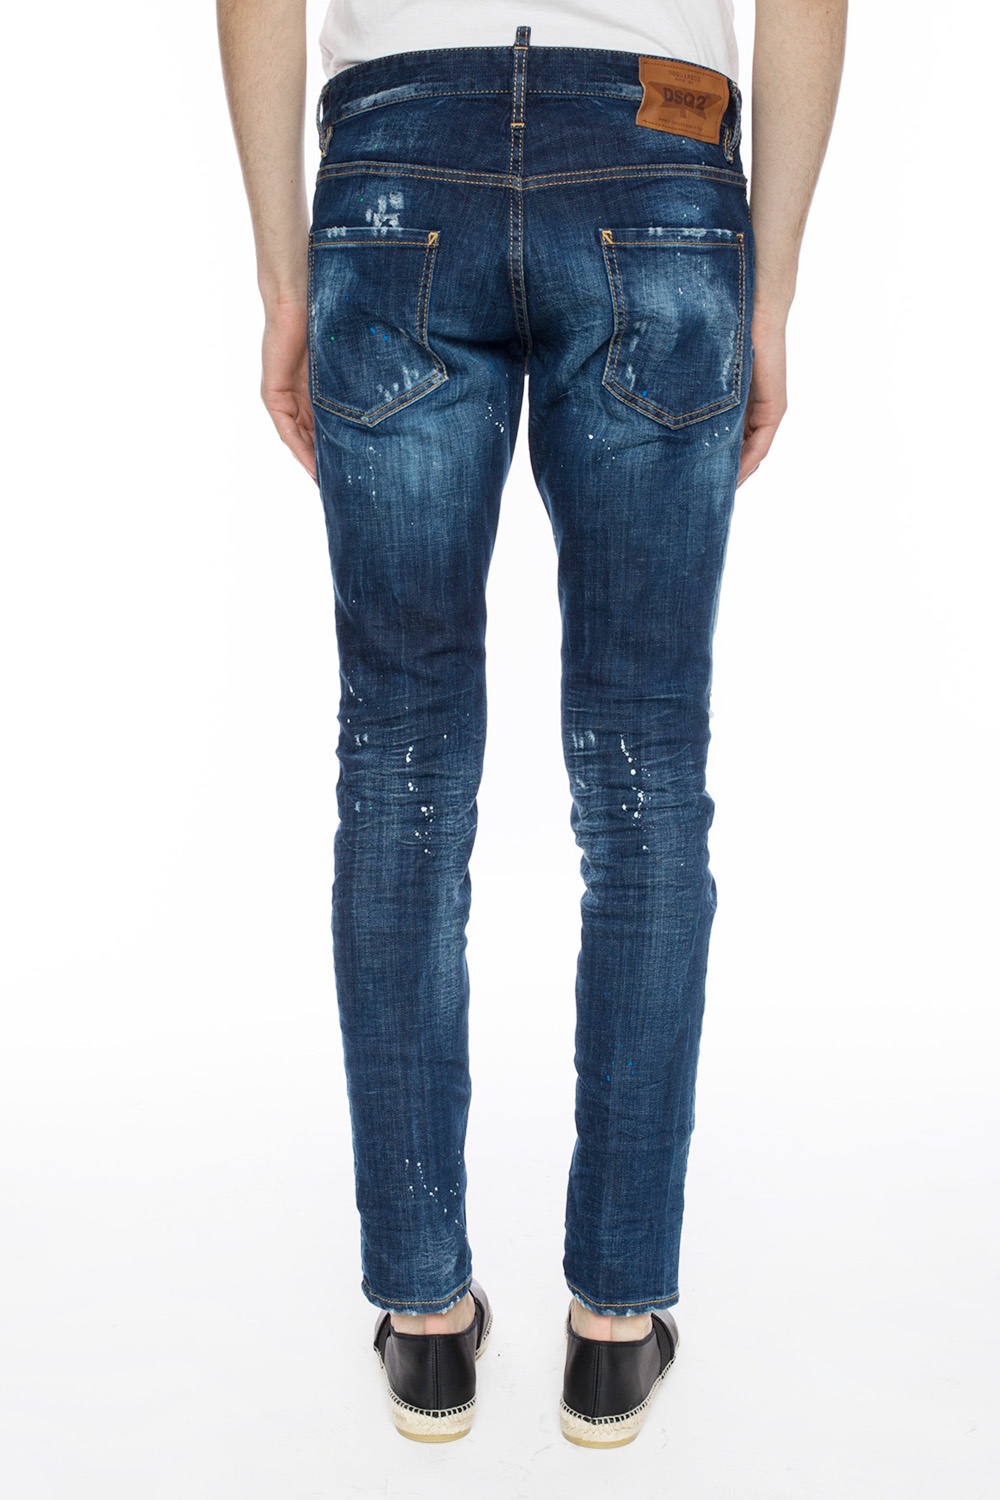 DSQUARED2 4 Story Cool Guy Jeans 42size - デニム/ジーンズ